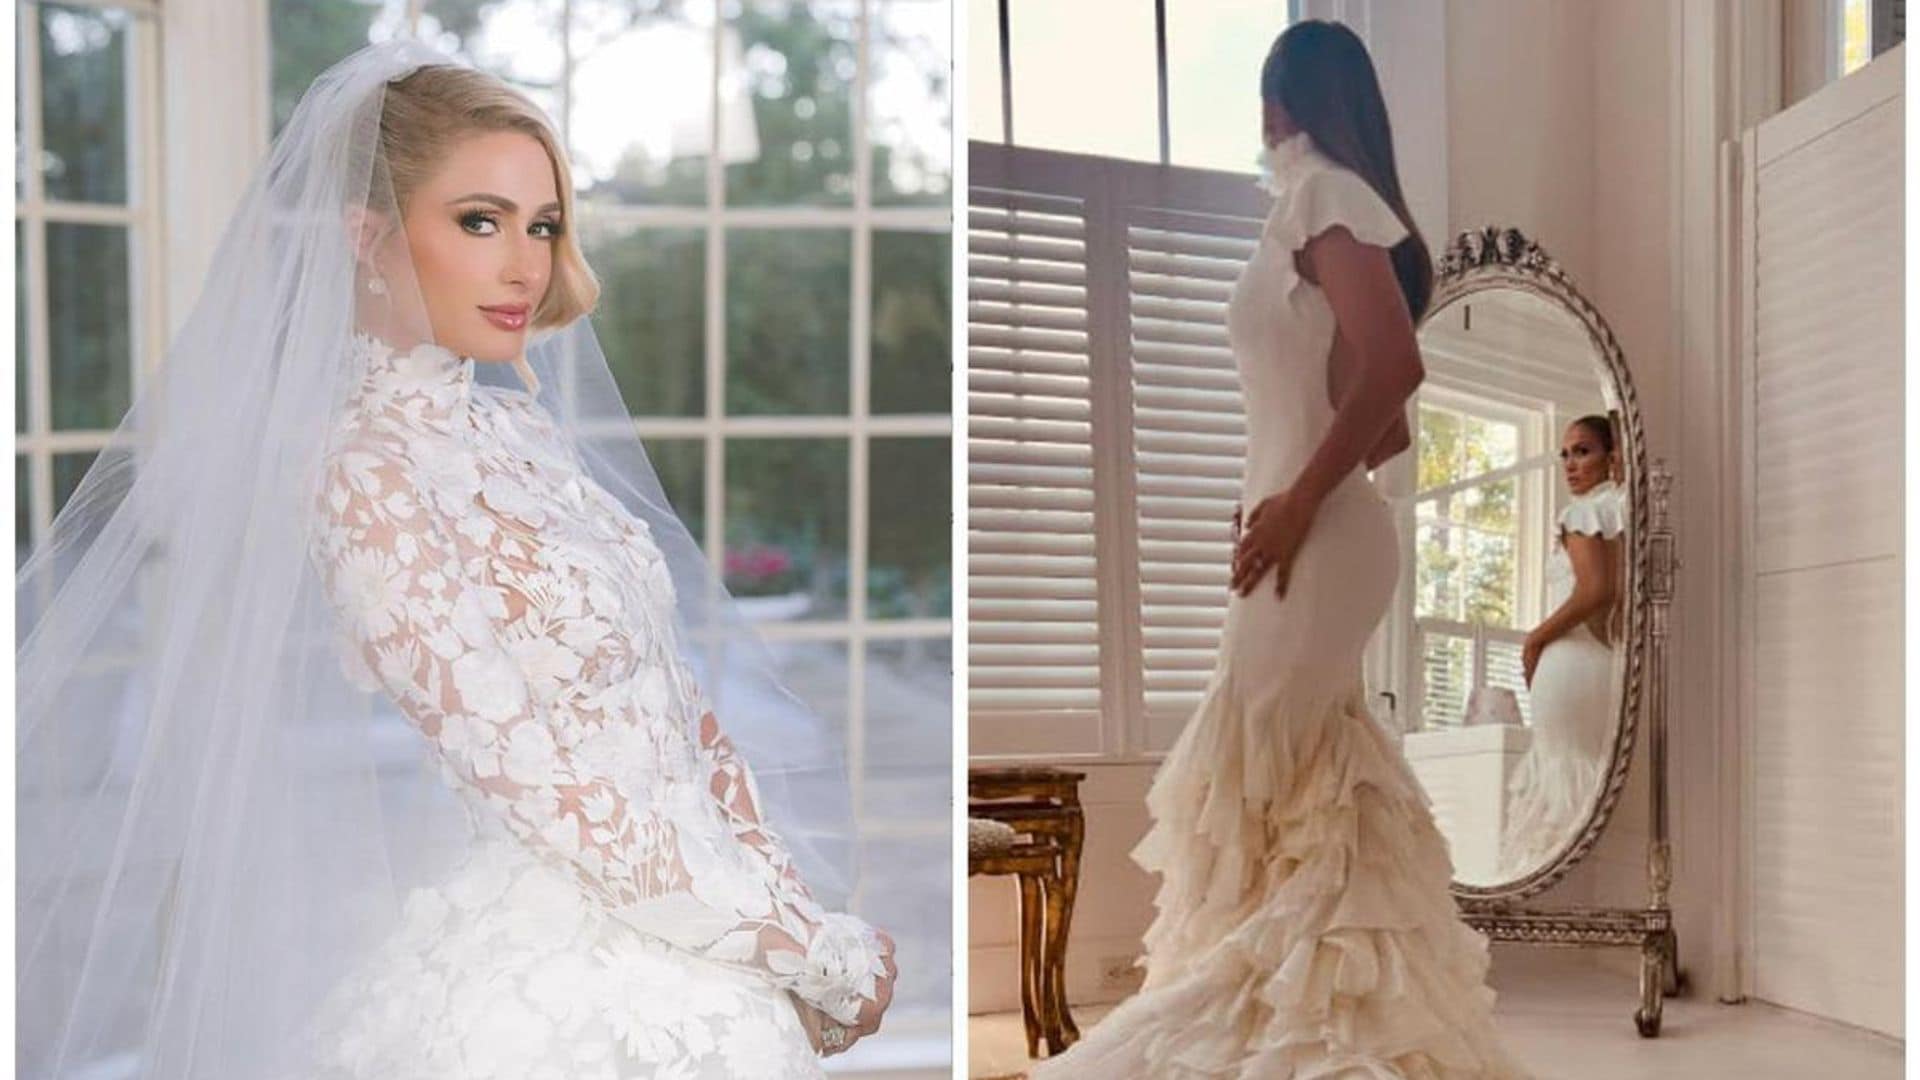 Six dreamy celebrity wedding dresses that will never go out of style